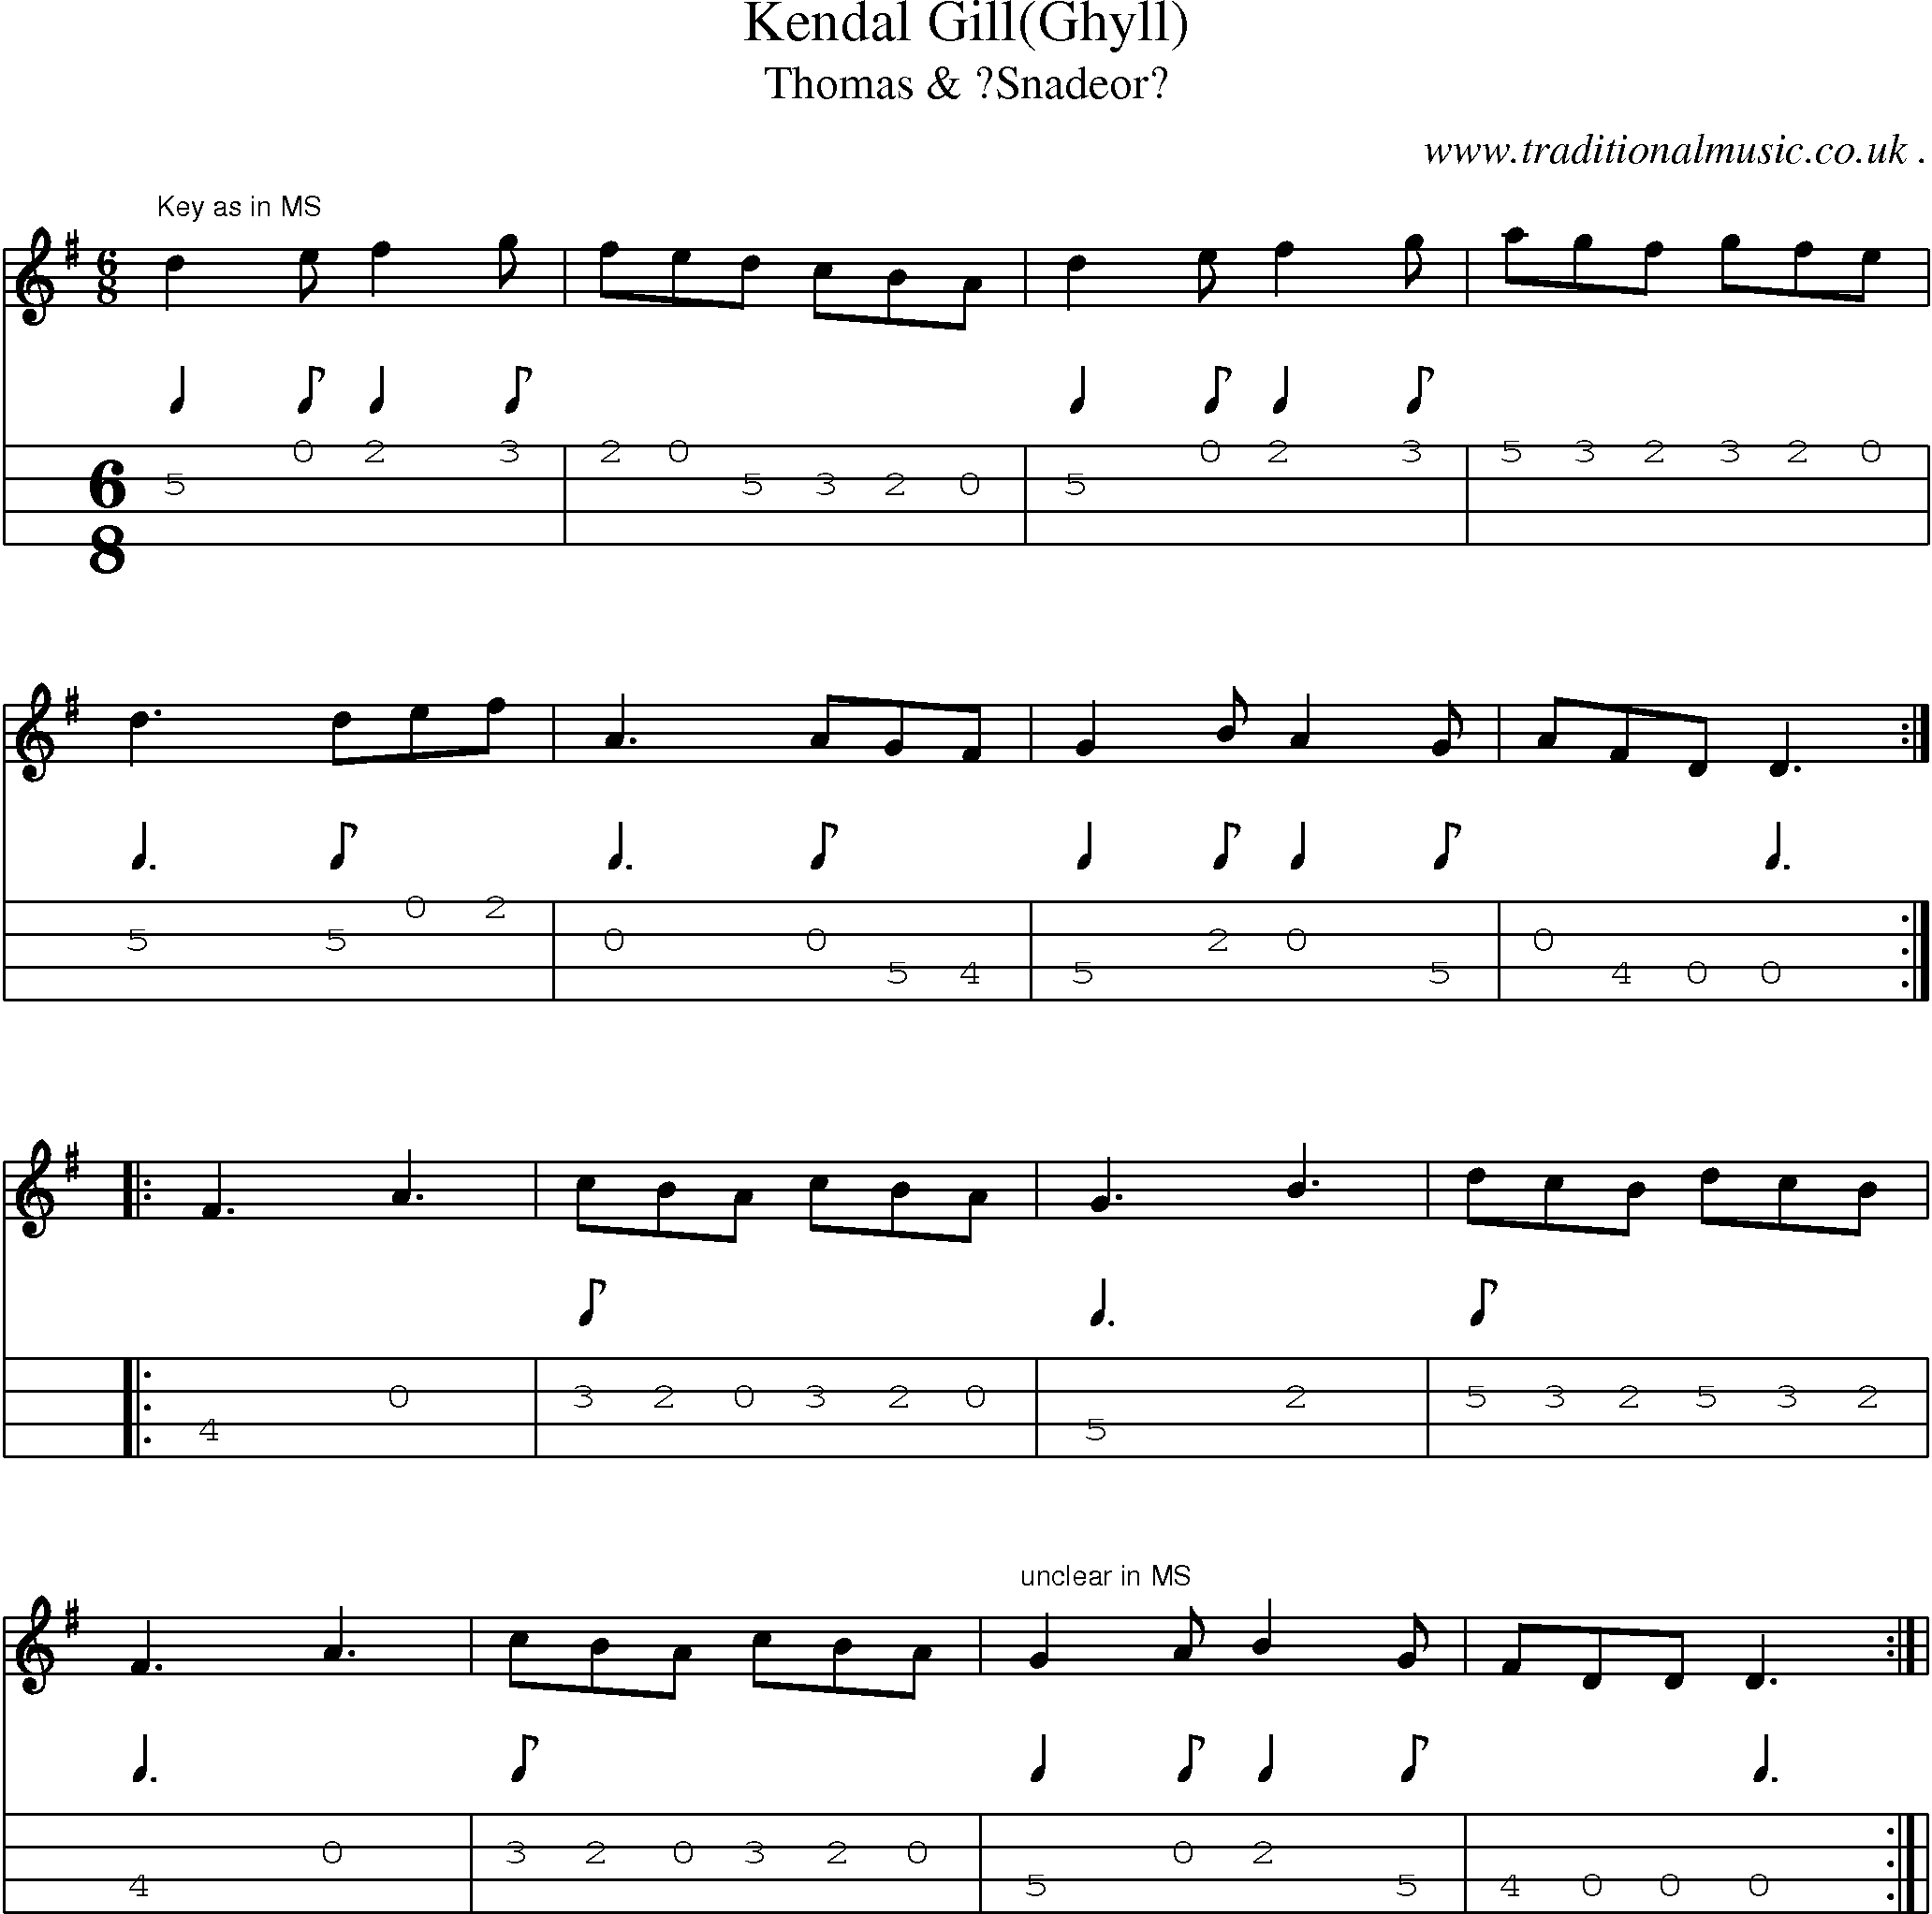 Sheet-Music and Mandolin Tabs for Kendal Gill(ghyll)